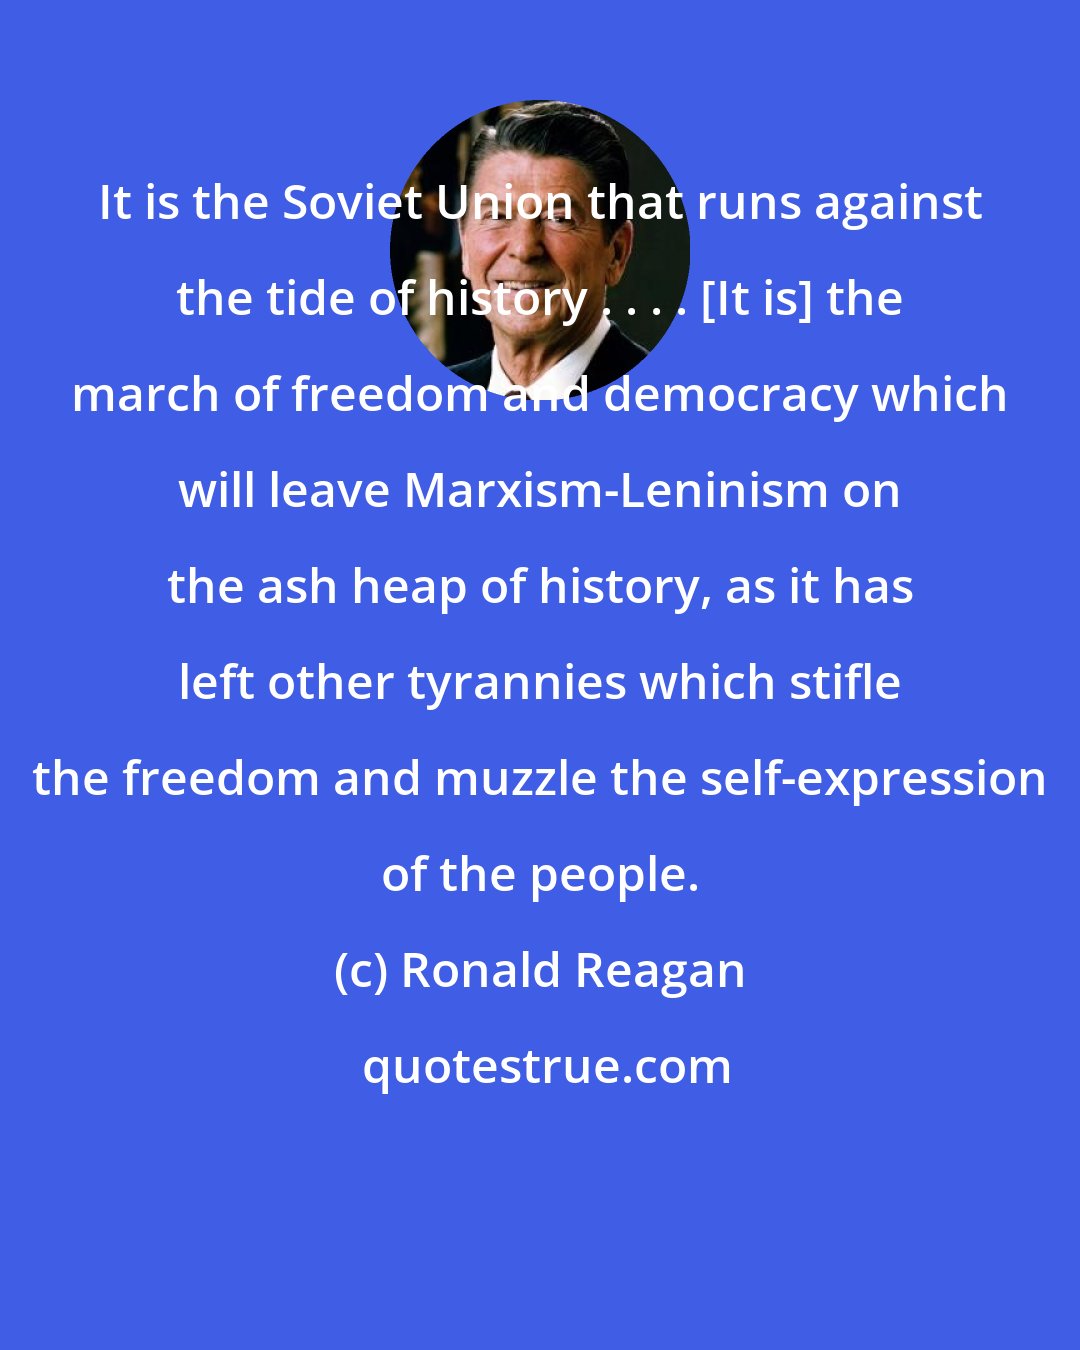 Ronald Reagan: It is the Soviet Union that runs against the tide of history . . . . [It is] the march of freedom and democracy which will leave Marxism-Leninism on the ash heap of history, as it has left other tyrannies which stifle the freedom and muzzle the self-expression of the people.